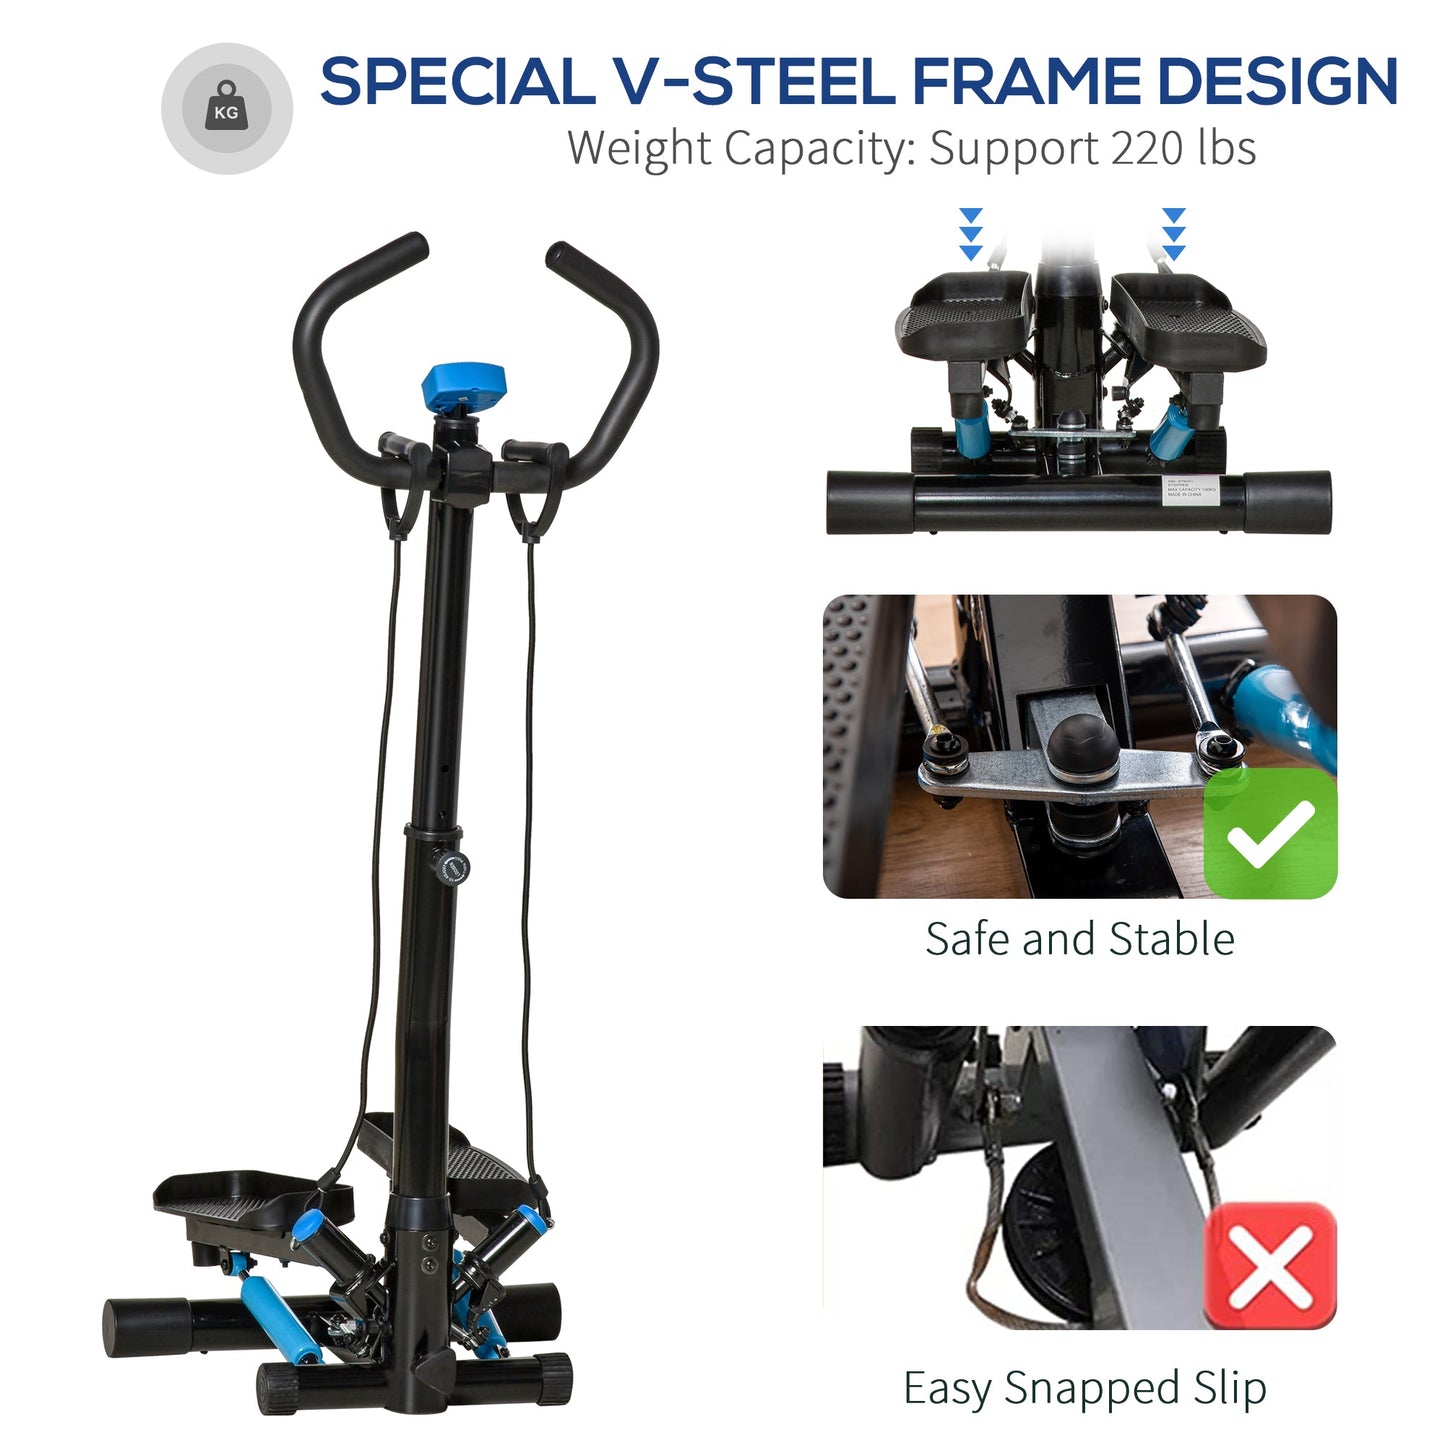 Sports and Fitness-Twist Stair Stepper, Cardio Exercise Machine w/ Elastic Bands, LCD Screen, Height Adjust Handlebars for Home Gym - Outdoor Style Company